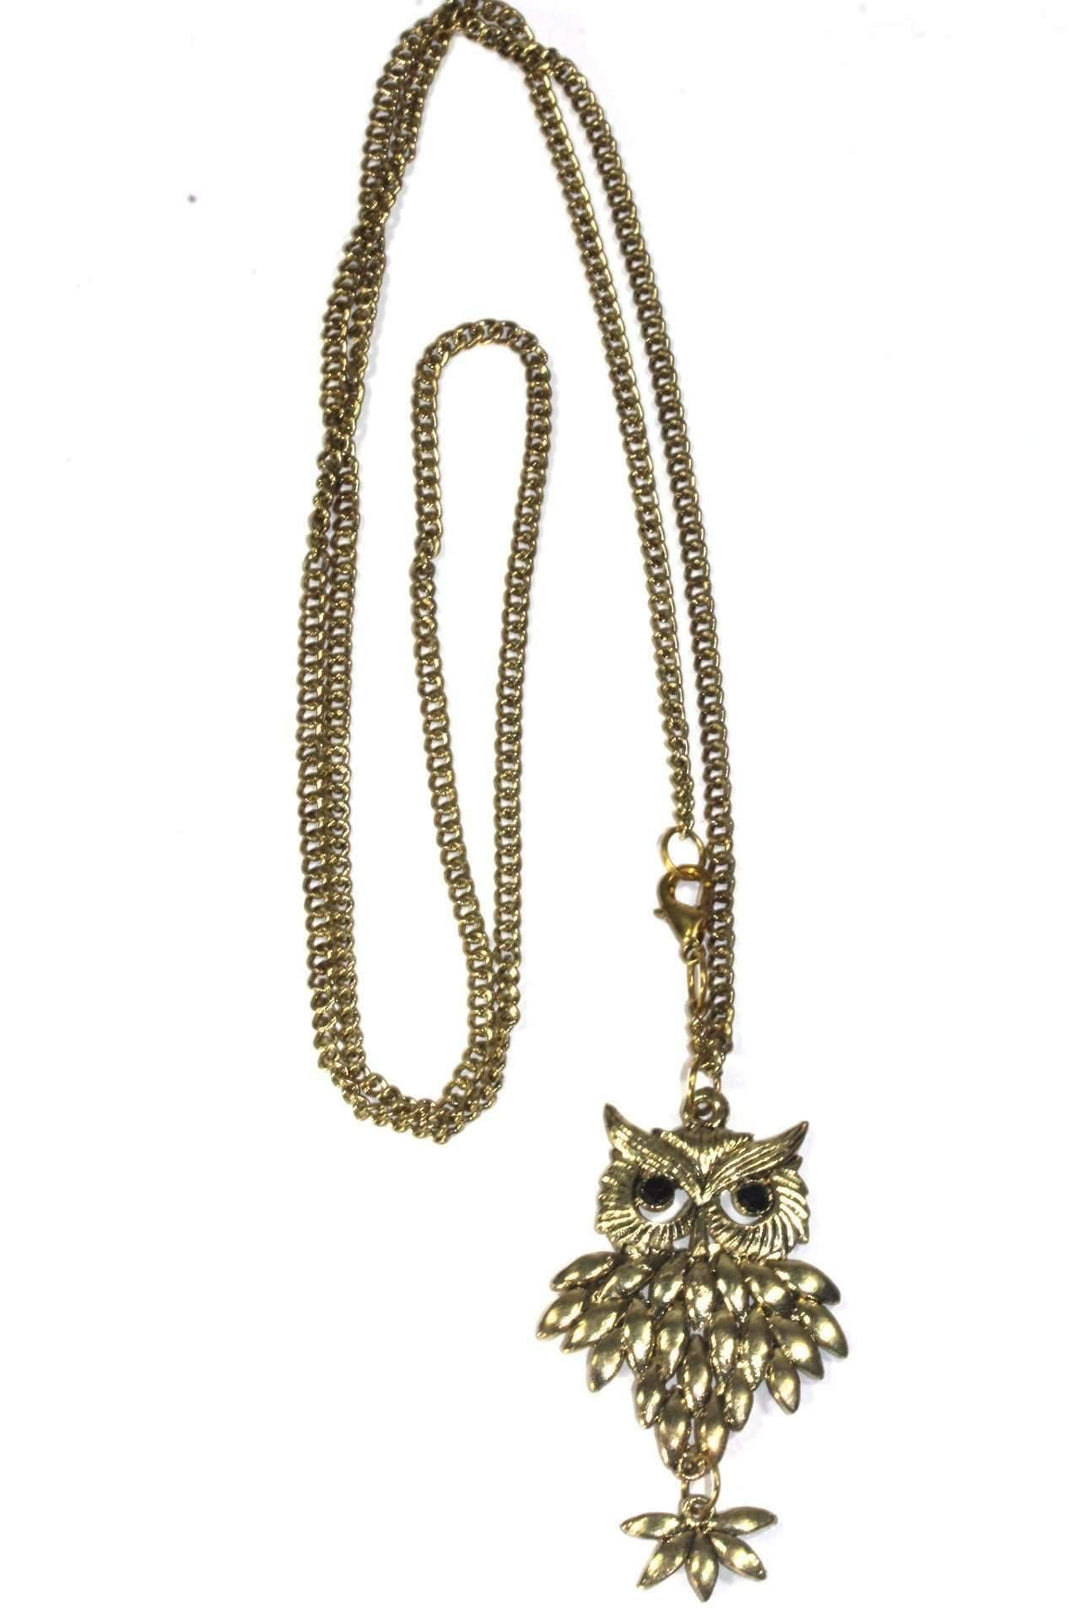 Rising Owl Pendant Necklace - Brand My Case